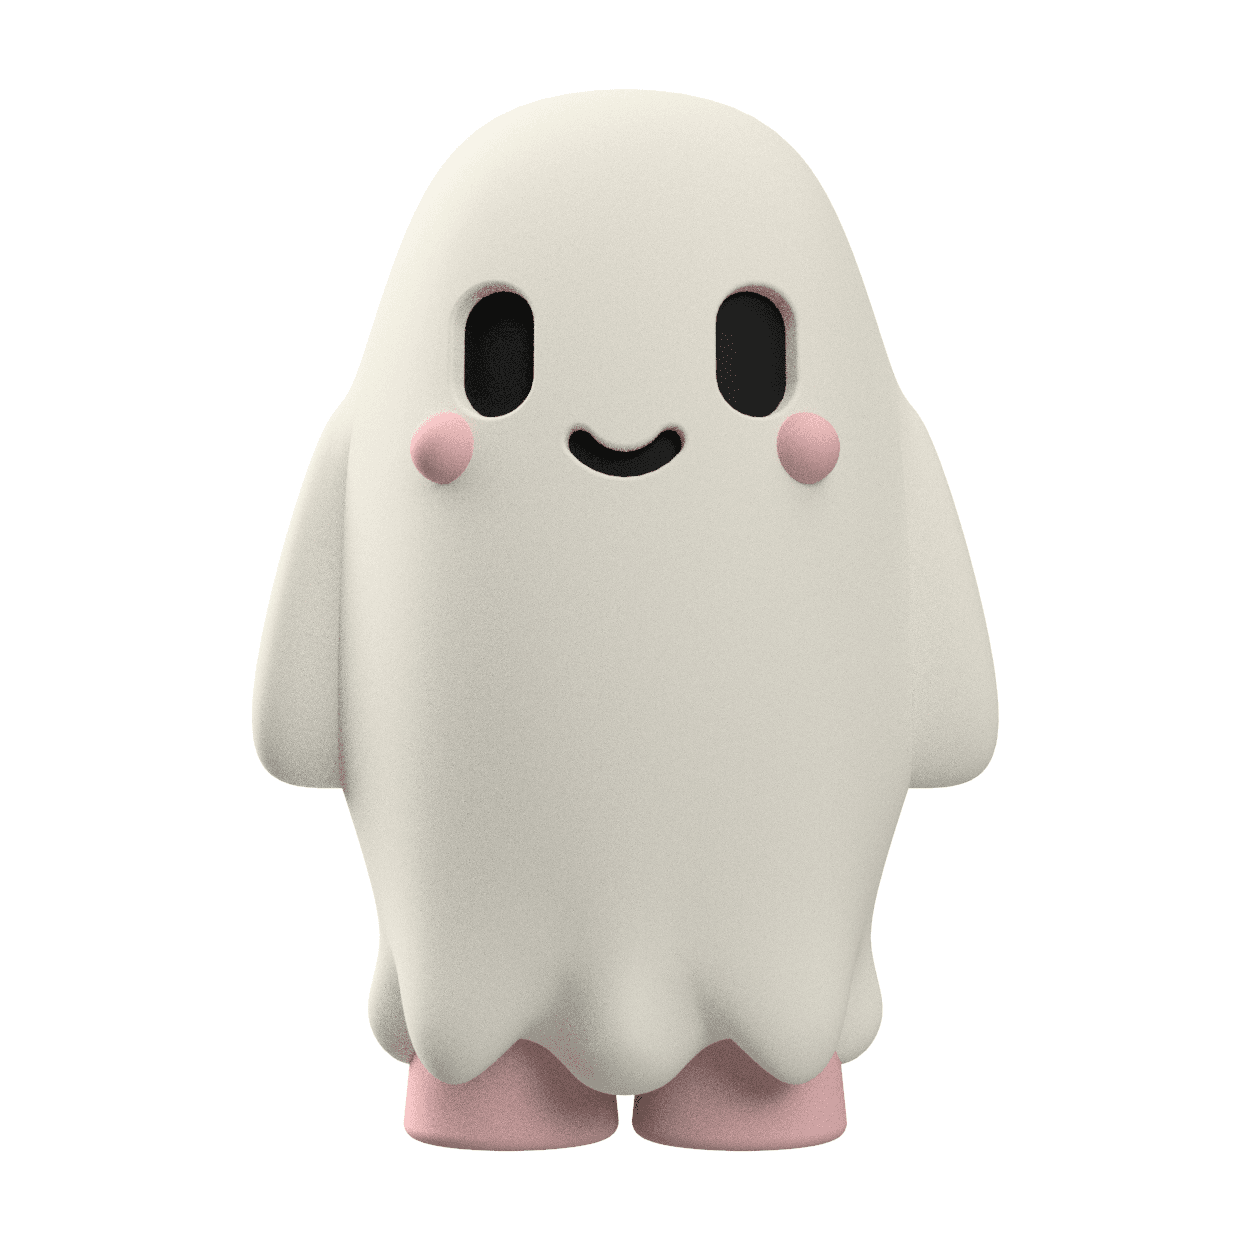 3D Printable Giggles the Friendly Ghost Figure – Perfect for Personal & Commercial Projects! 3d model